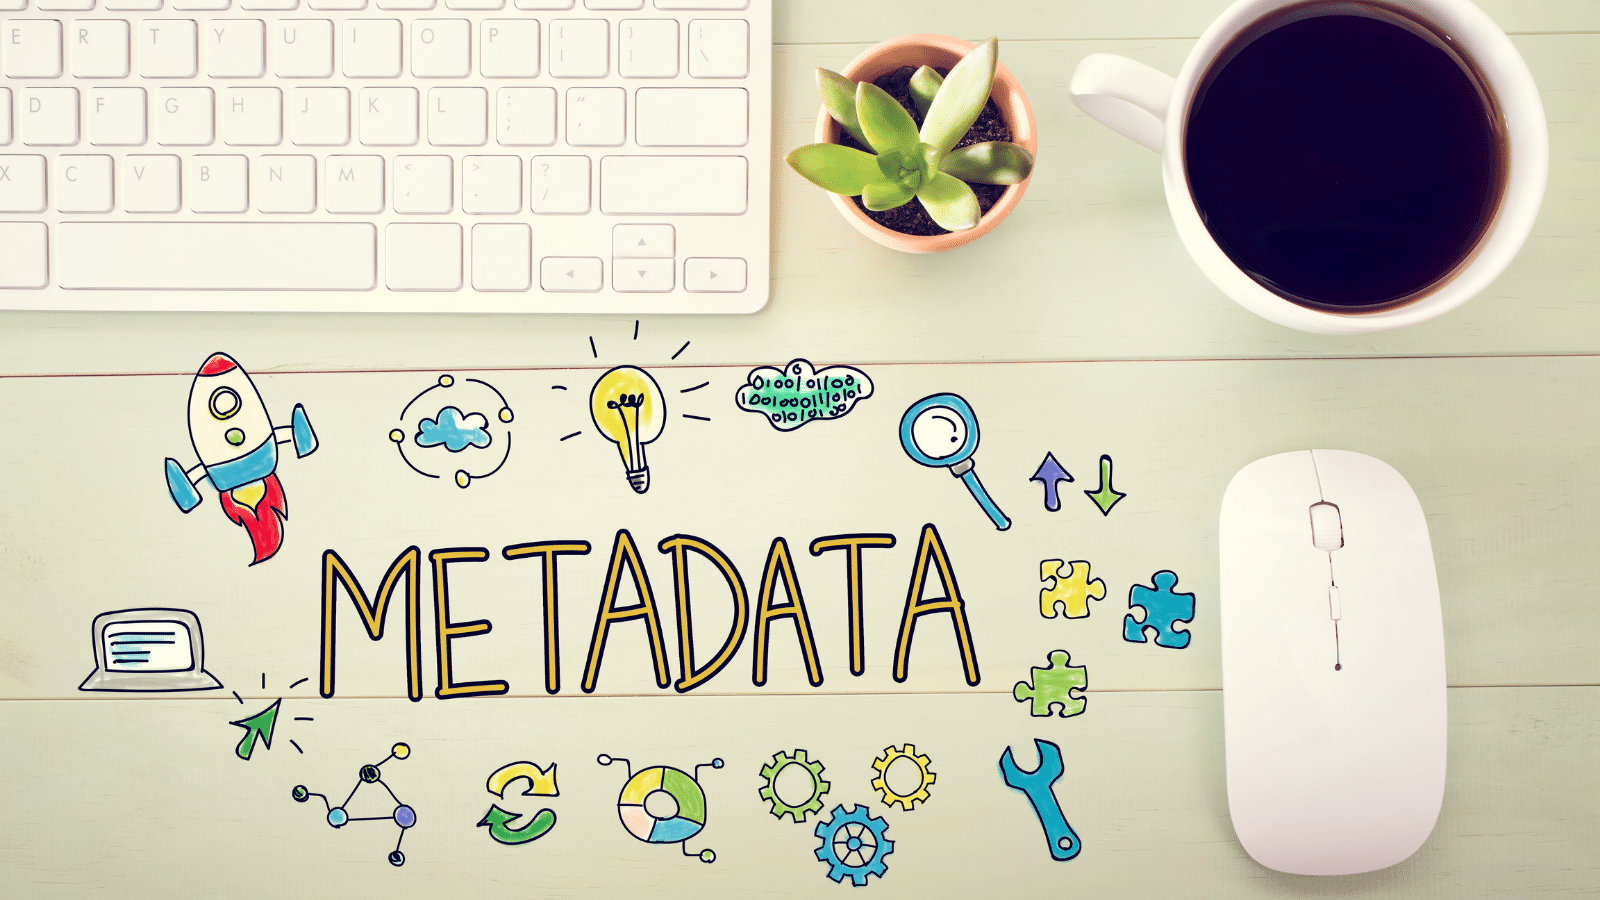 Tracking metadata from events.